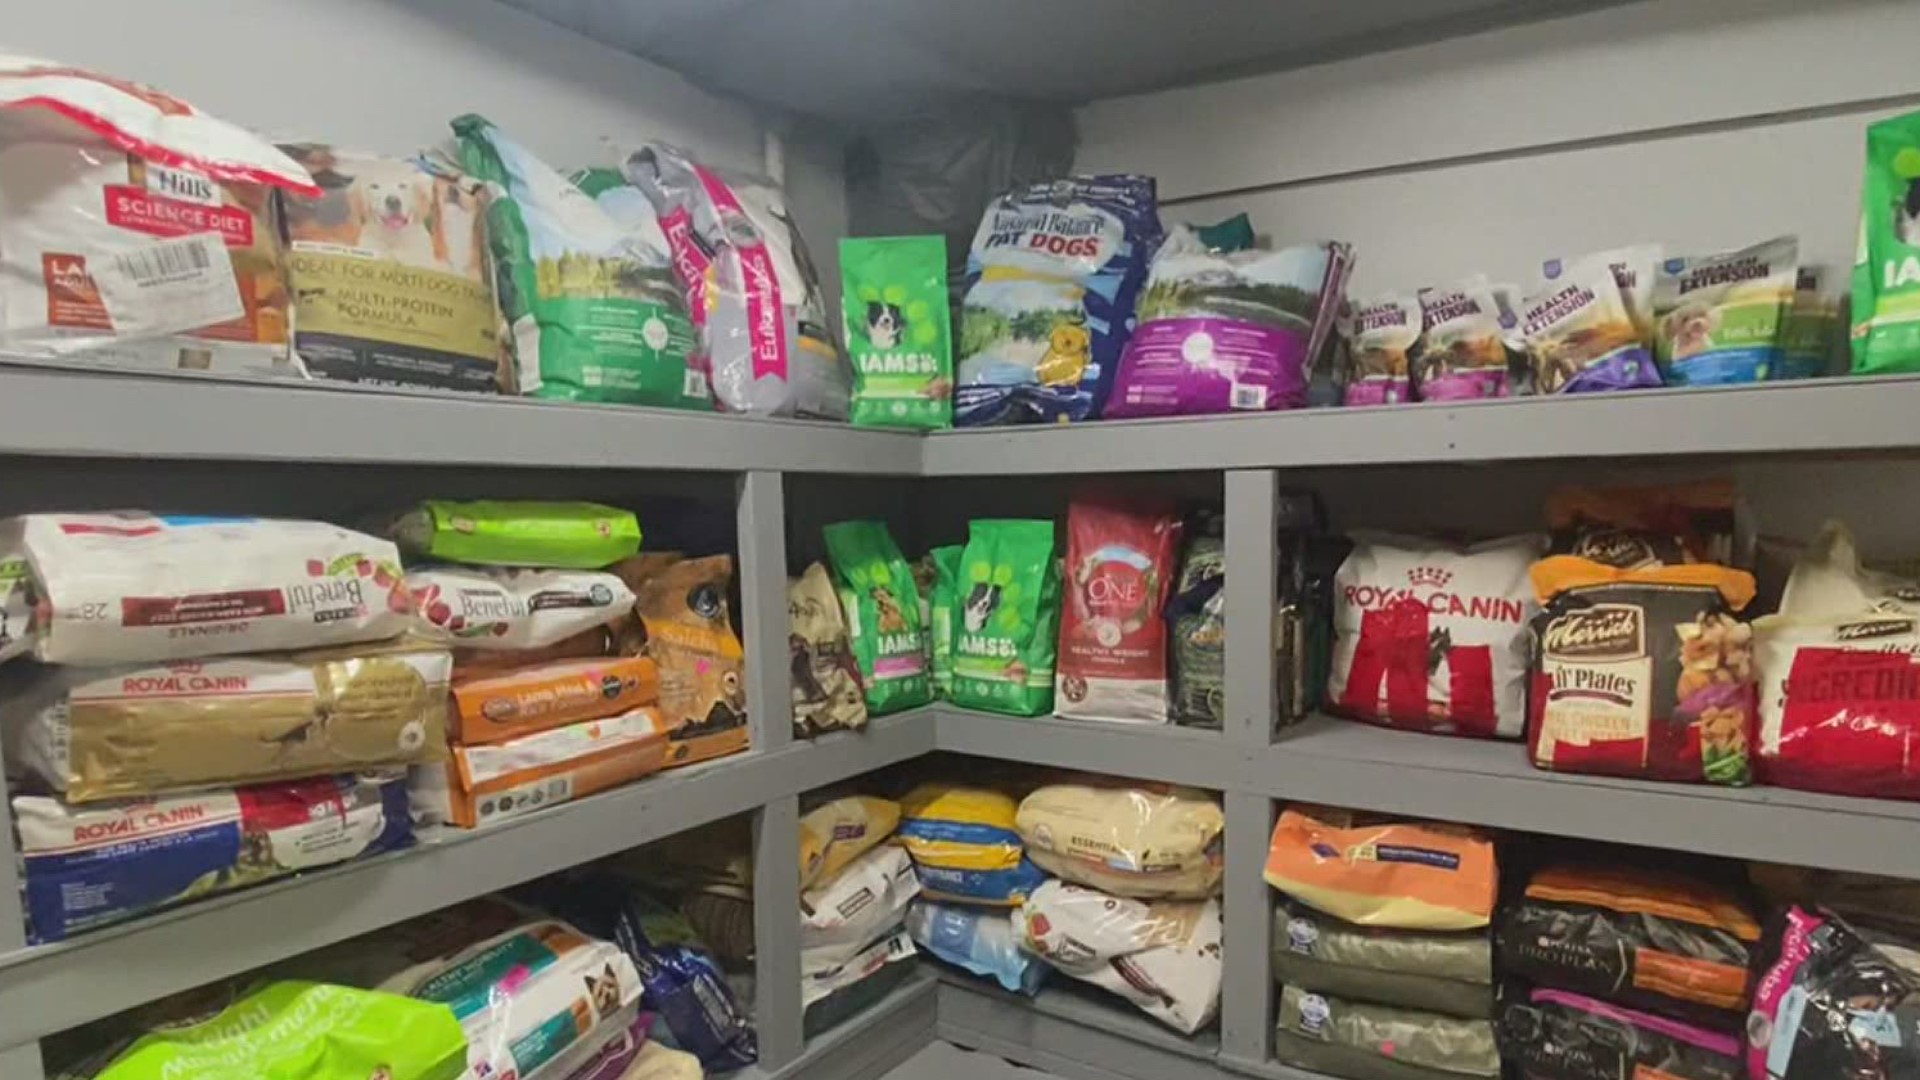 The Furry Friends Foodbank opened up Saturday morning along Route 209 in Stroudsburg the place offers pet food and supplies for families in need.